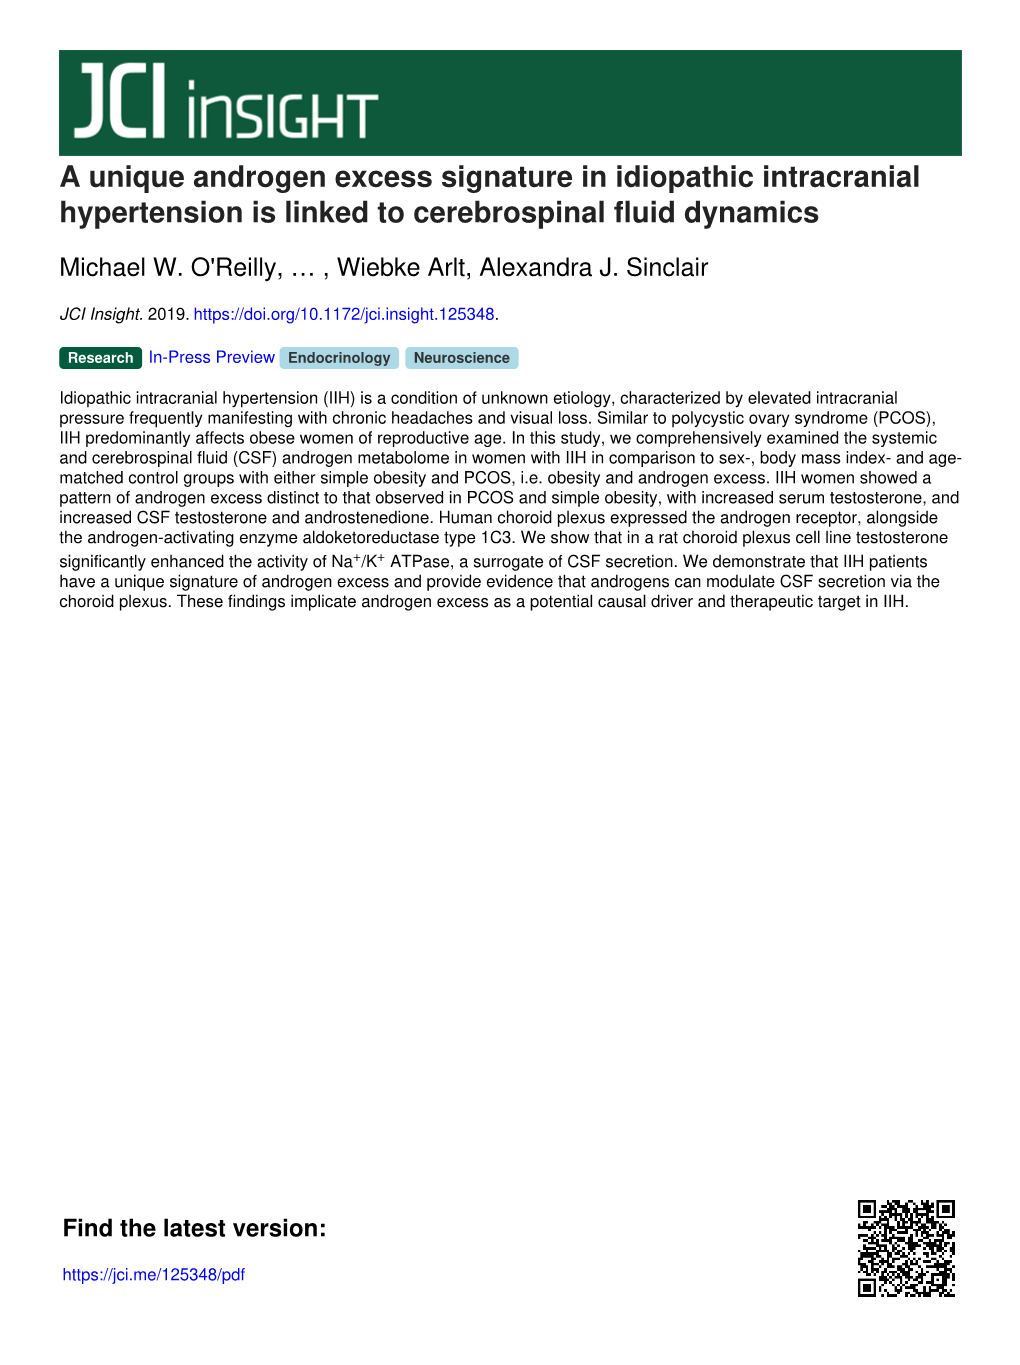 A Unique Androgen Excess Signature in Idiopathic Intracranial Hypertension Is Linked to Cerebrospinal Fluid Dynamics